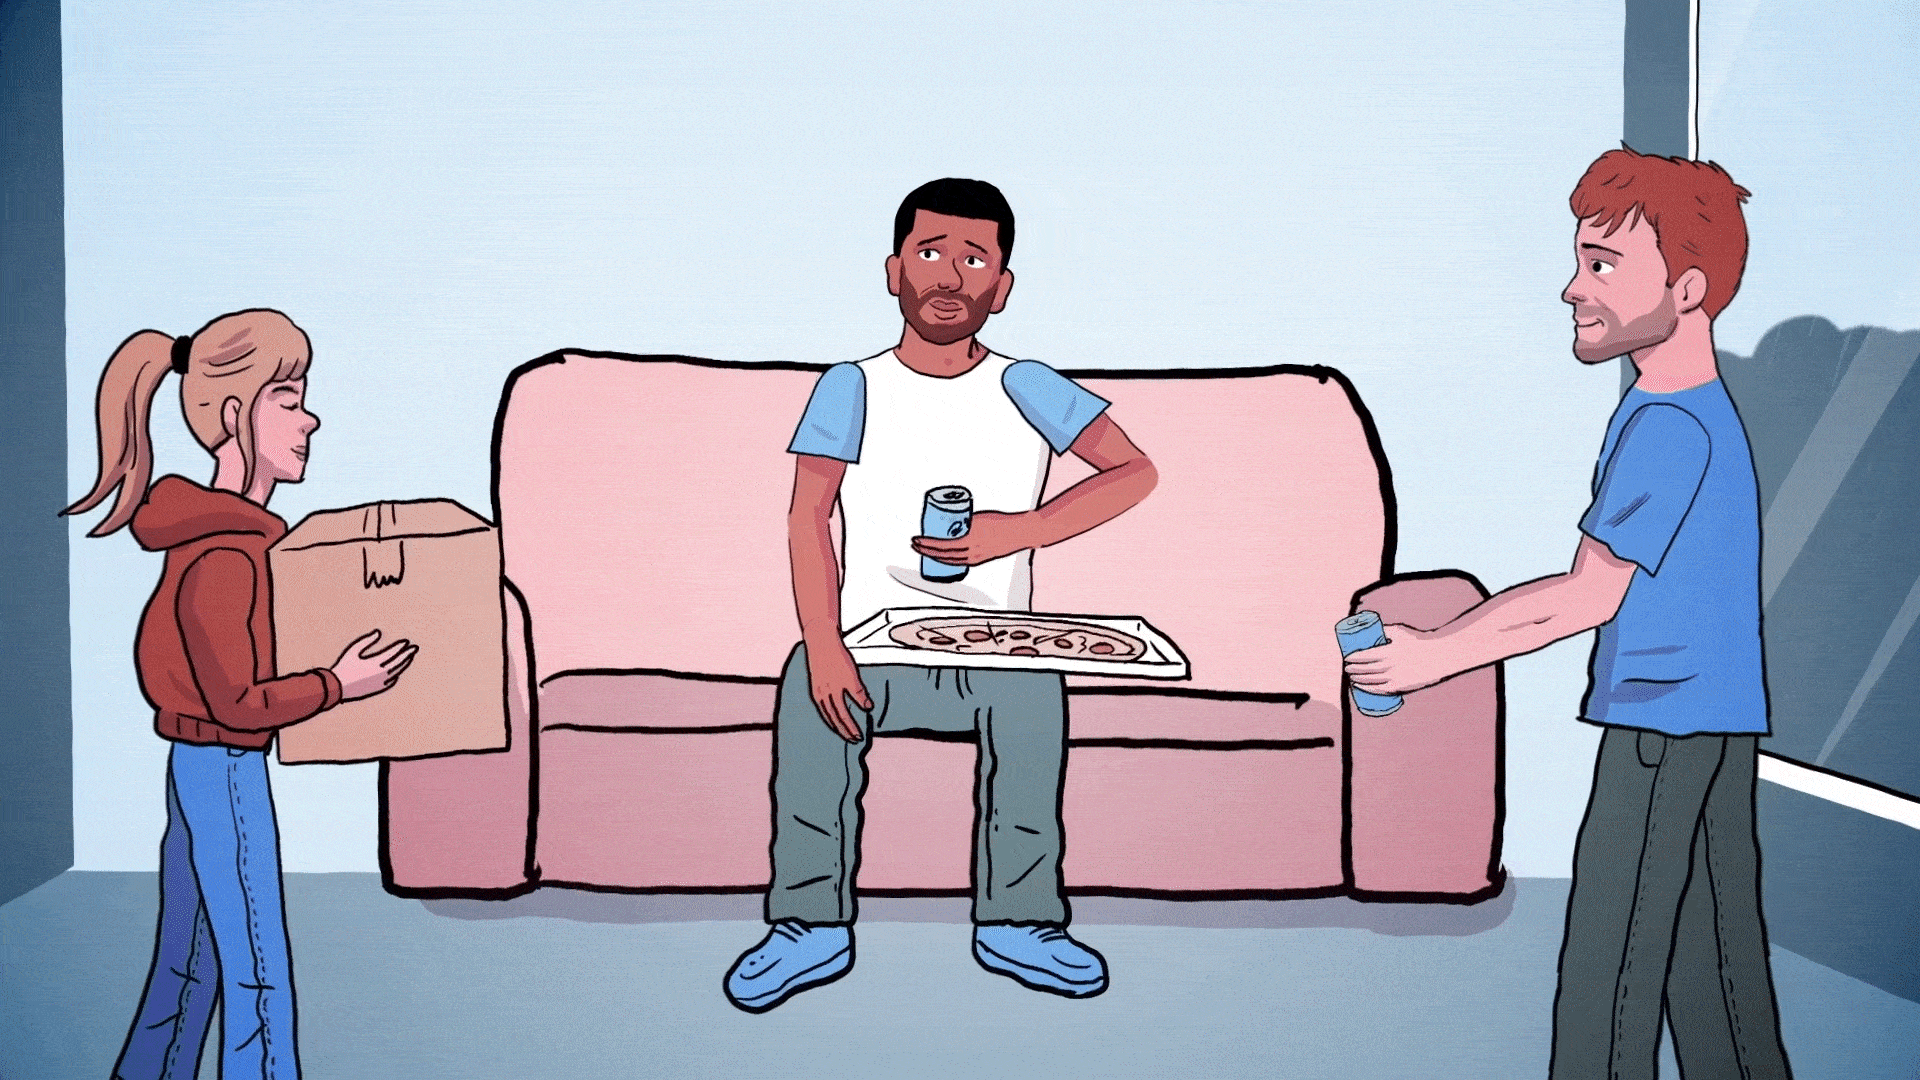 Main character sitting on sofa with pizza and beers - banner to enter interactive